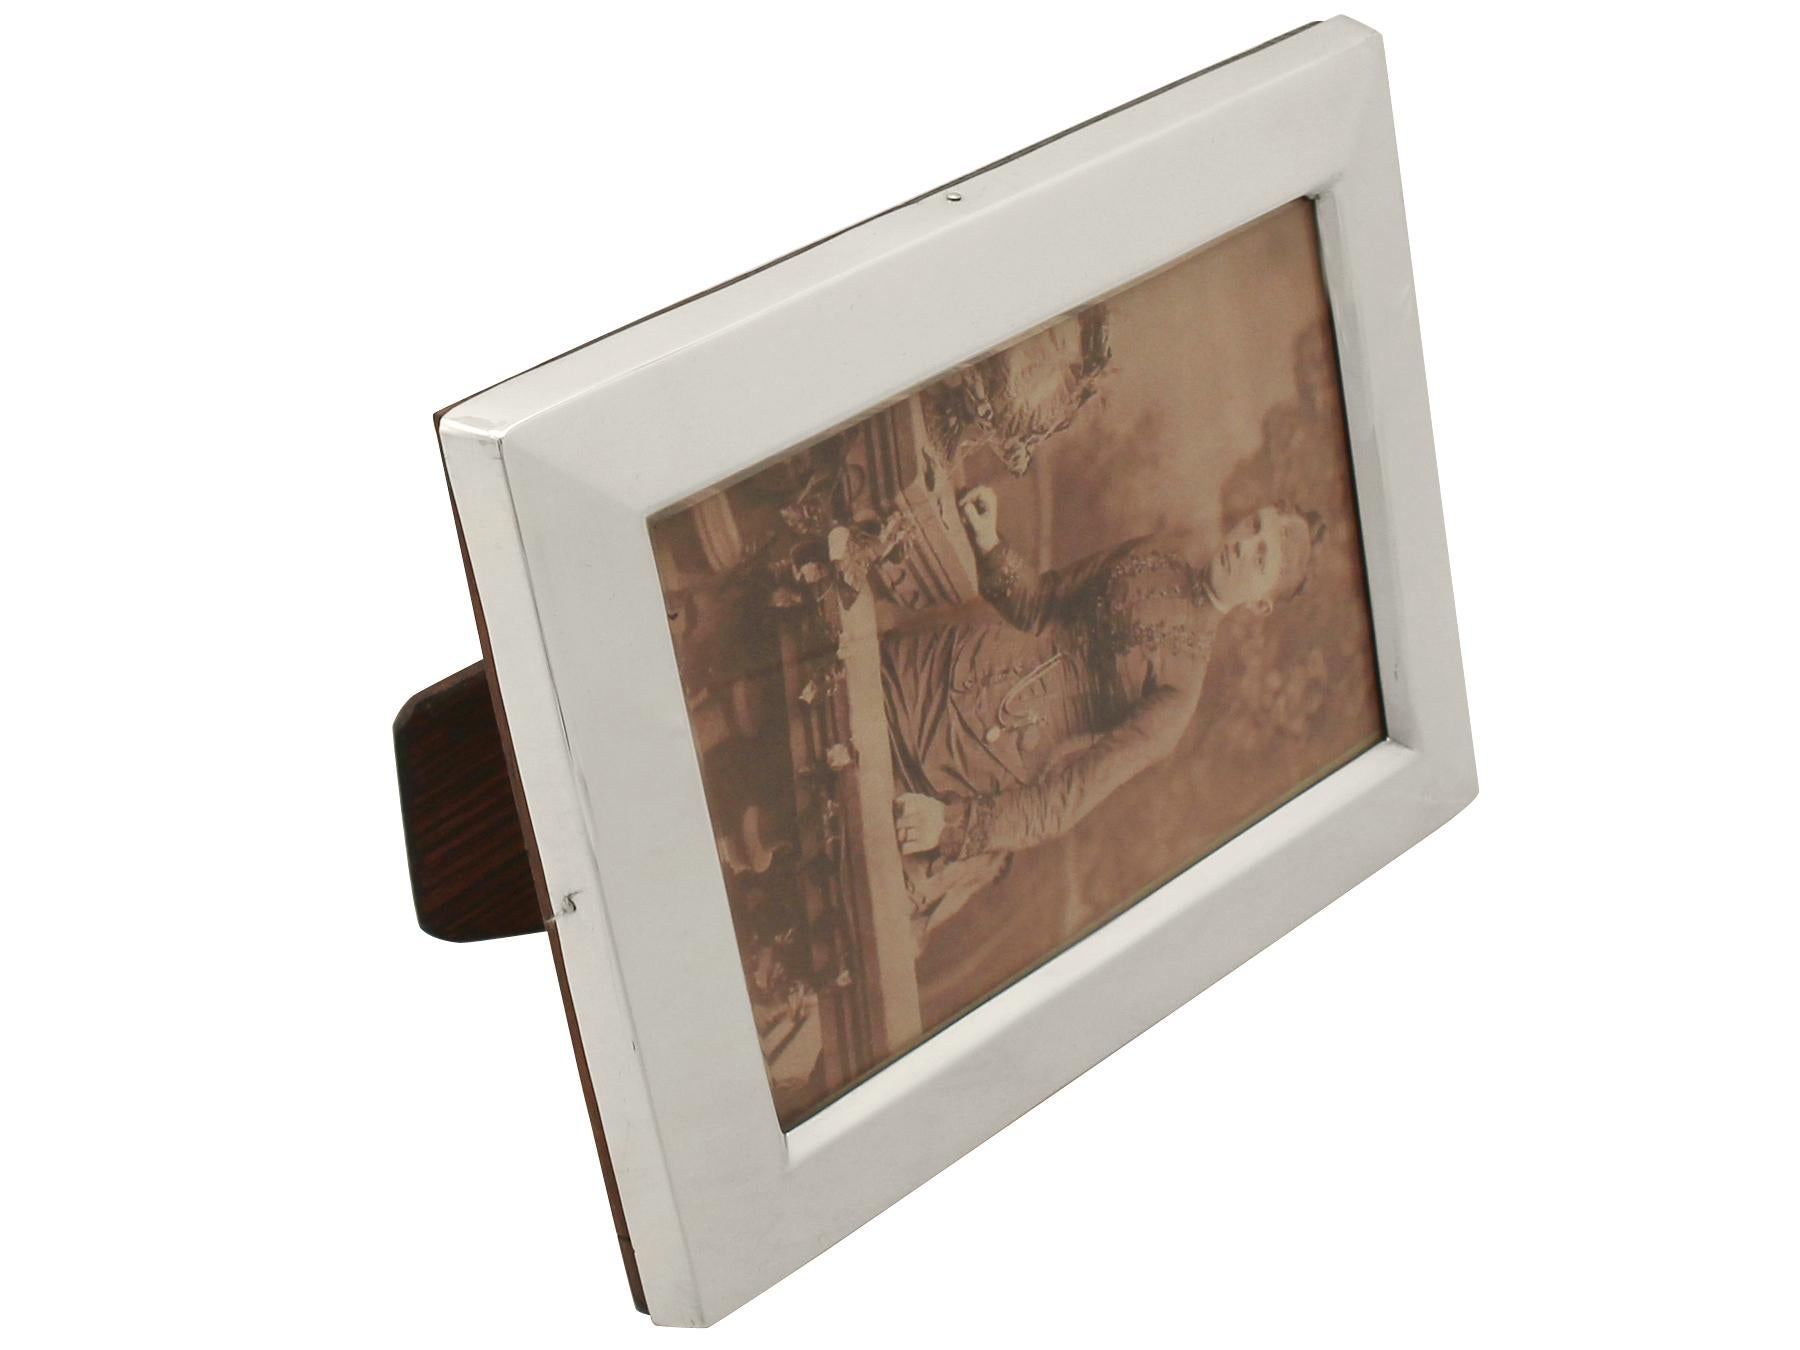 A fine and impressive antique Victorian English sterling silver photograph frame, an addition to our ornamental silverware collection

This exceptional antique Victorian sterling silver photograph frame has a plain rectangular form.

The